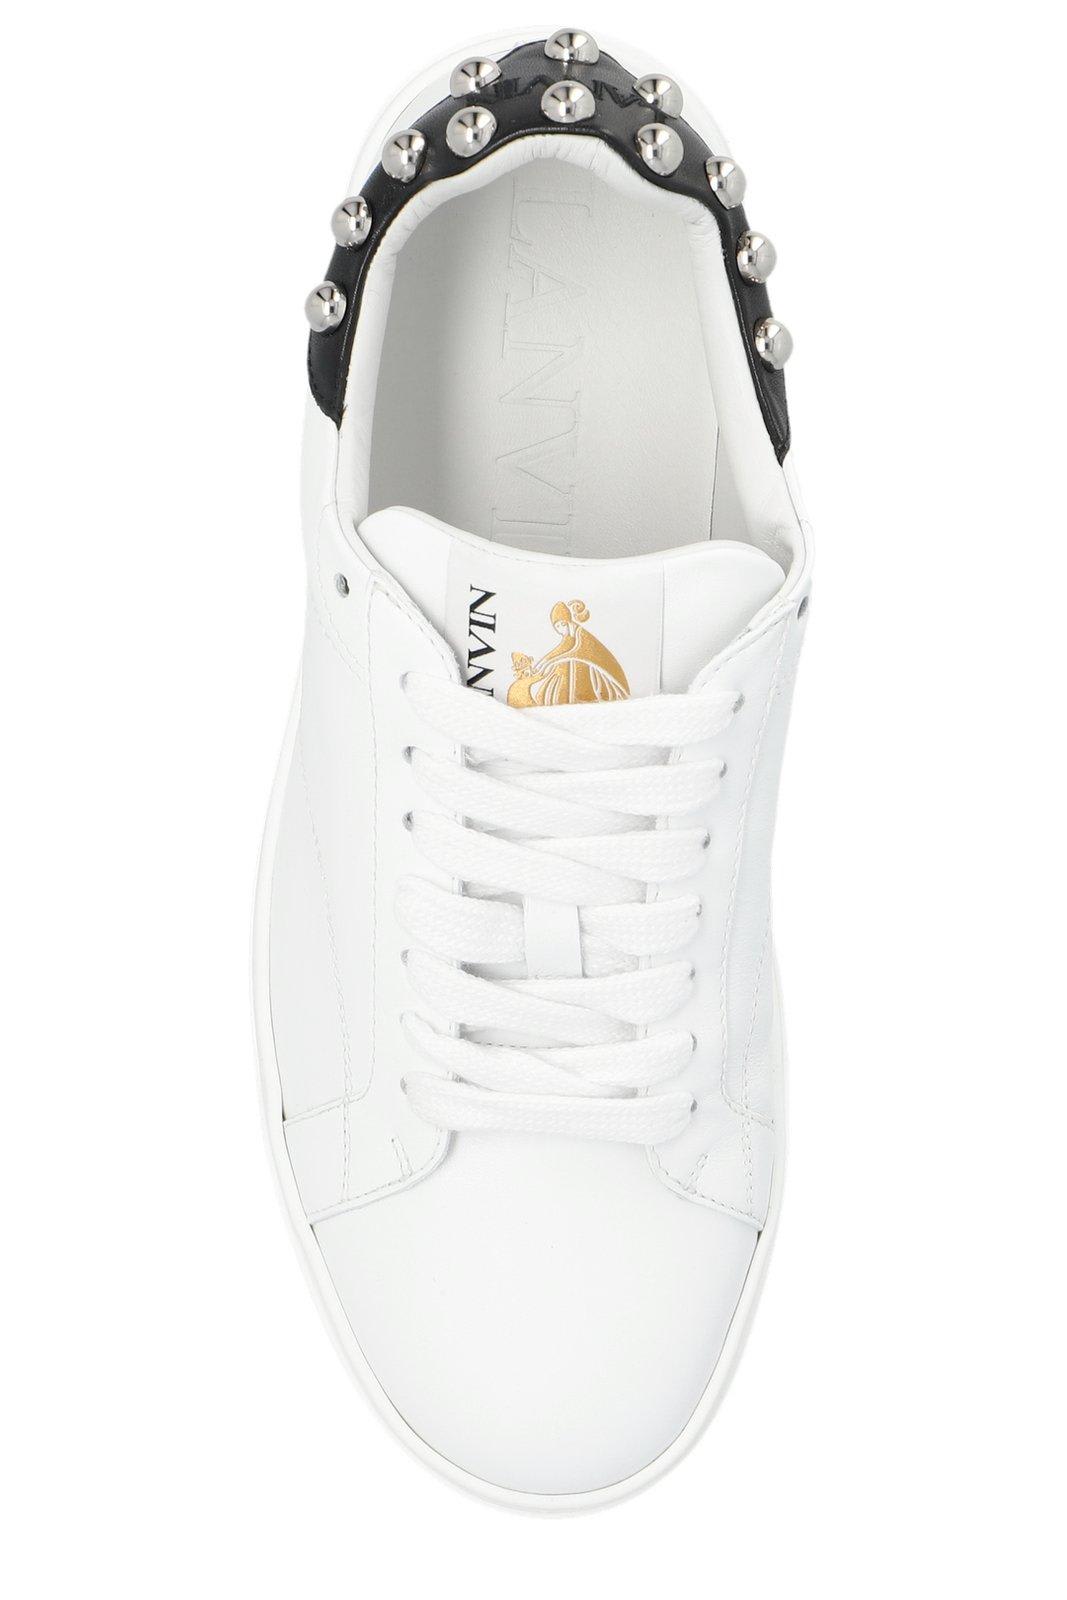 Shop Lanvin Back Studded Sneakers In White Silver